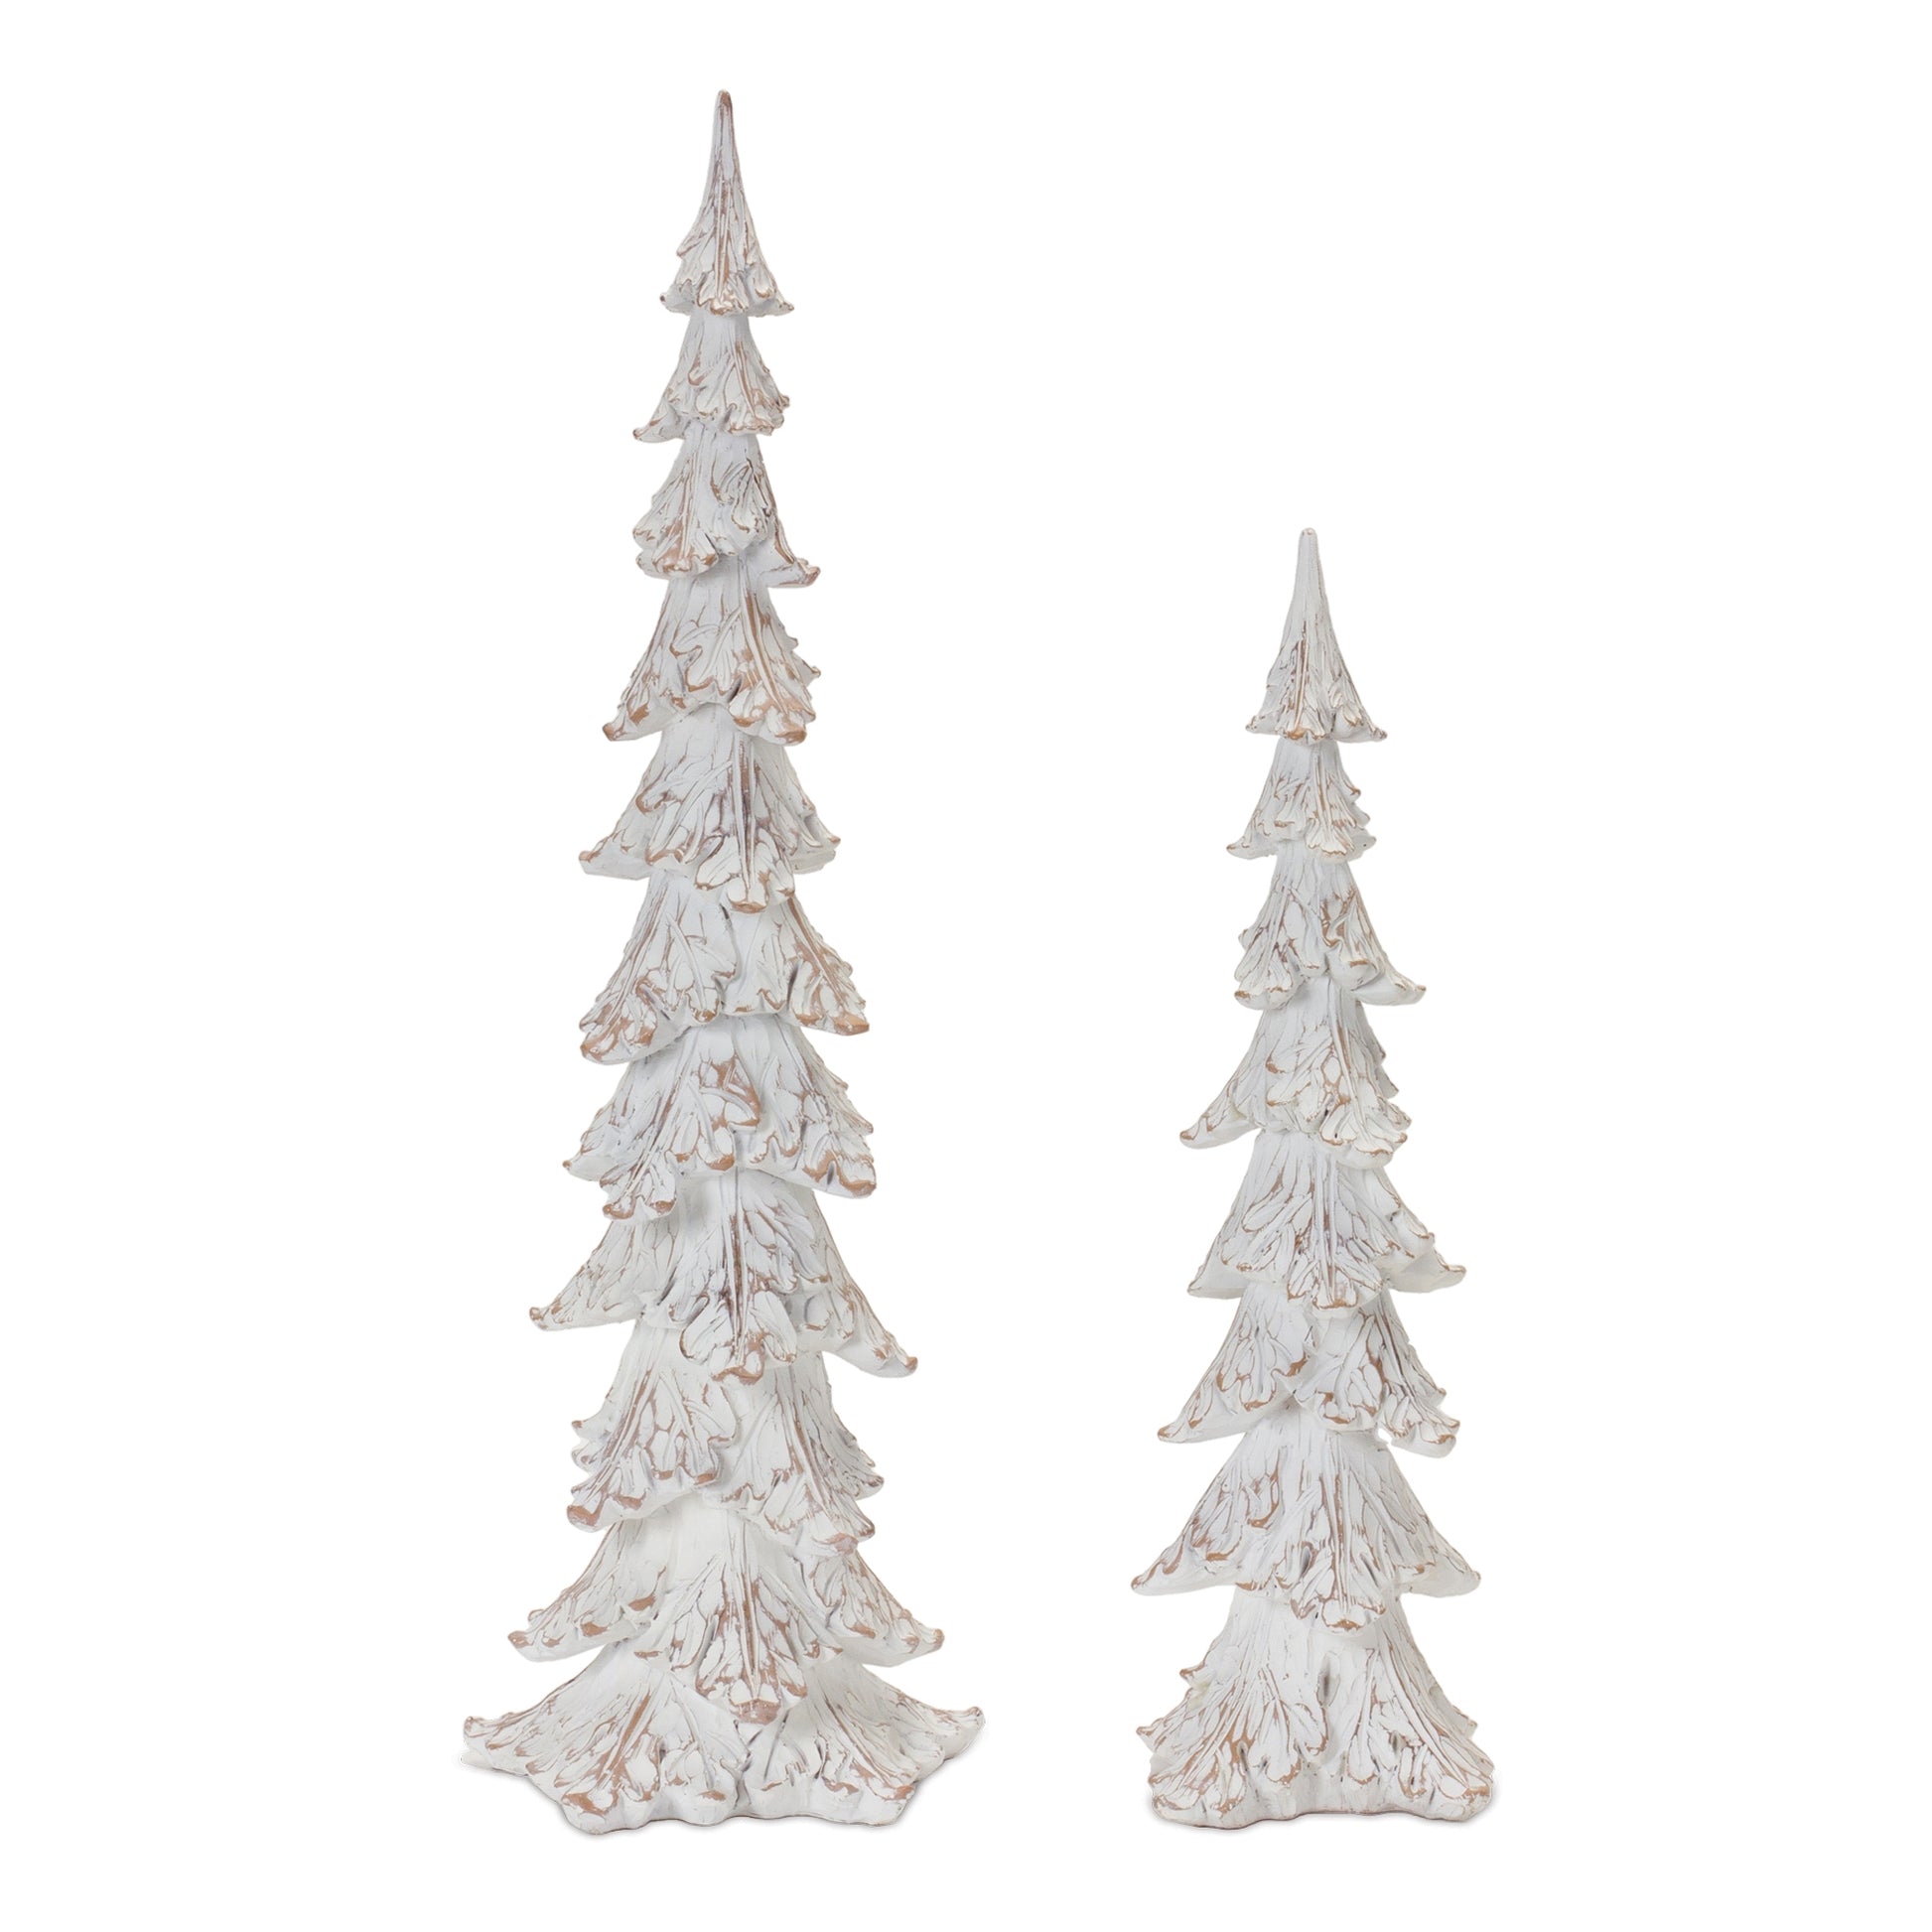 both sizes of narrow distressed trees displayed against a white background